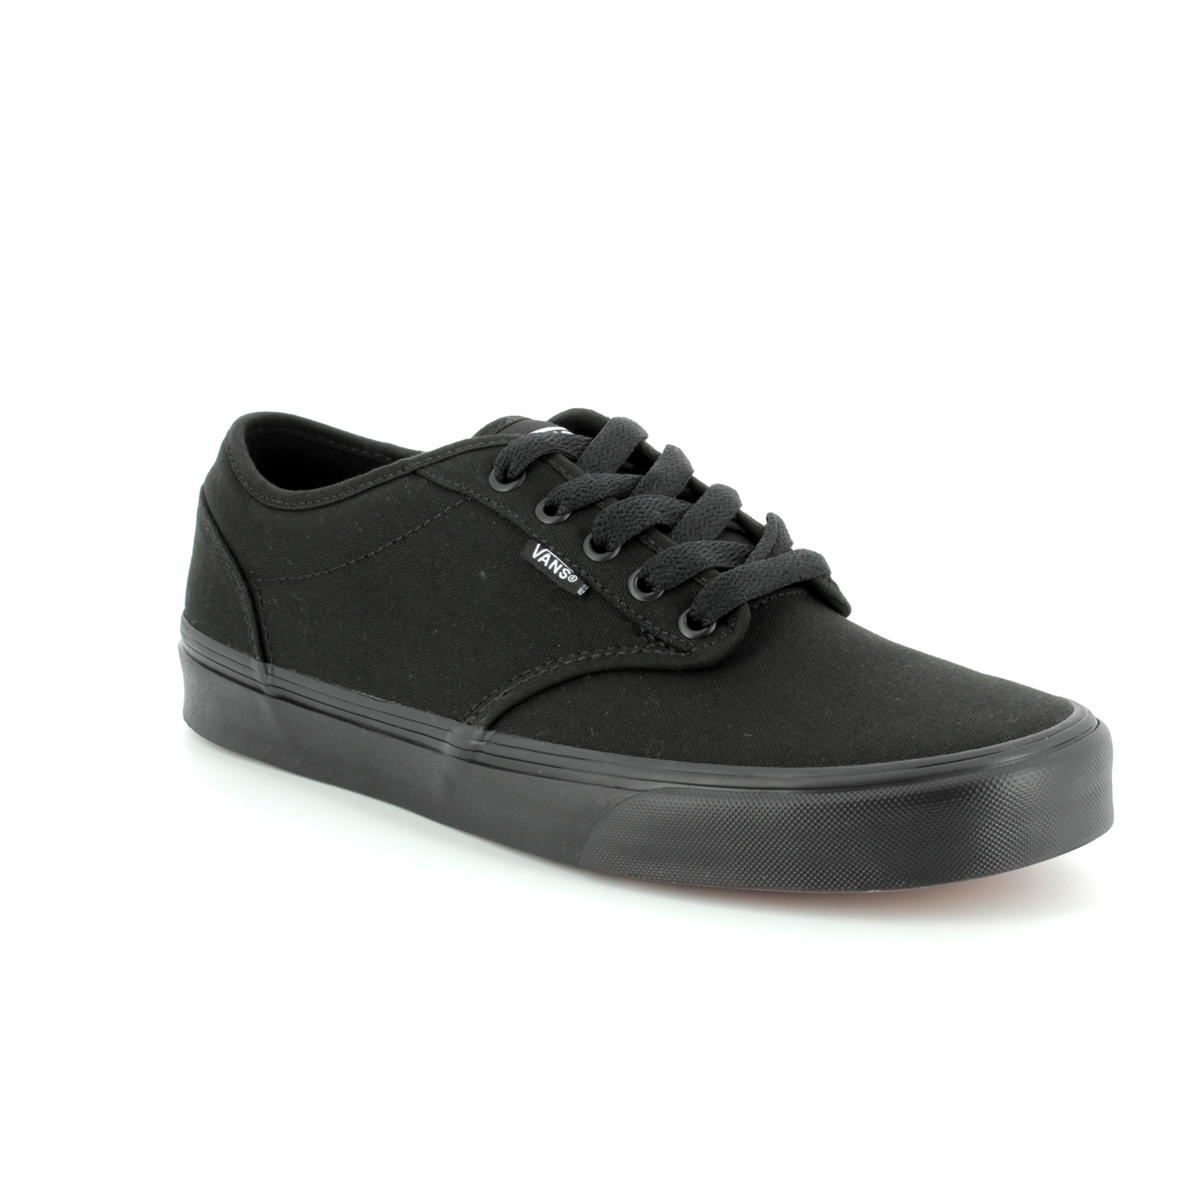 Vans Atwood Black Mens trainers VN000TUY1-861 in a Plain Canvas in Size 7